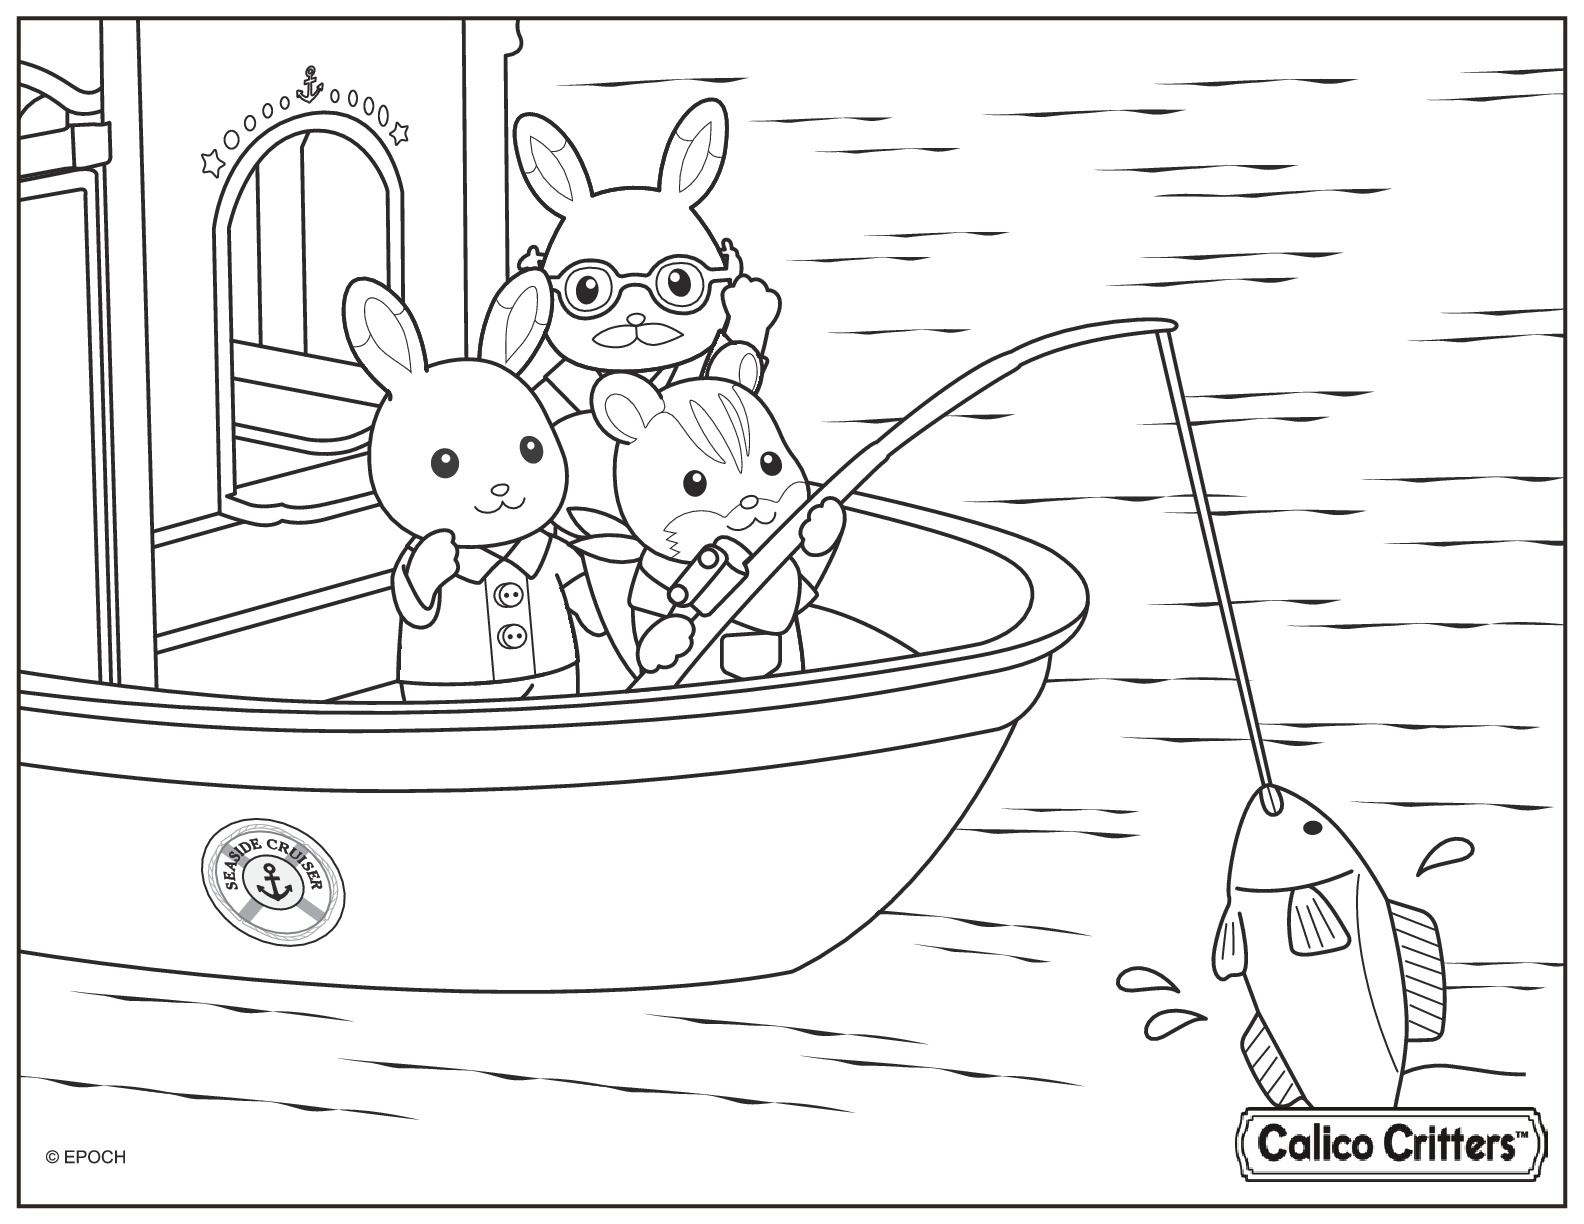 Calico Critters Fishing